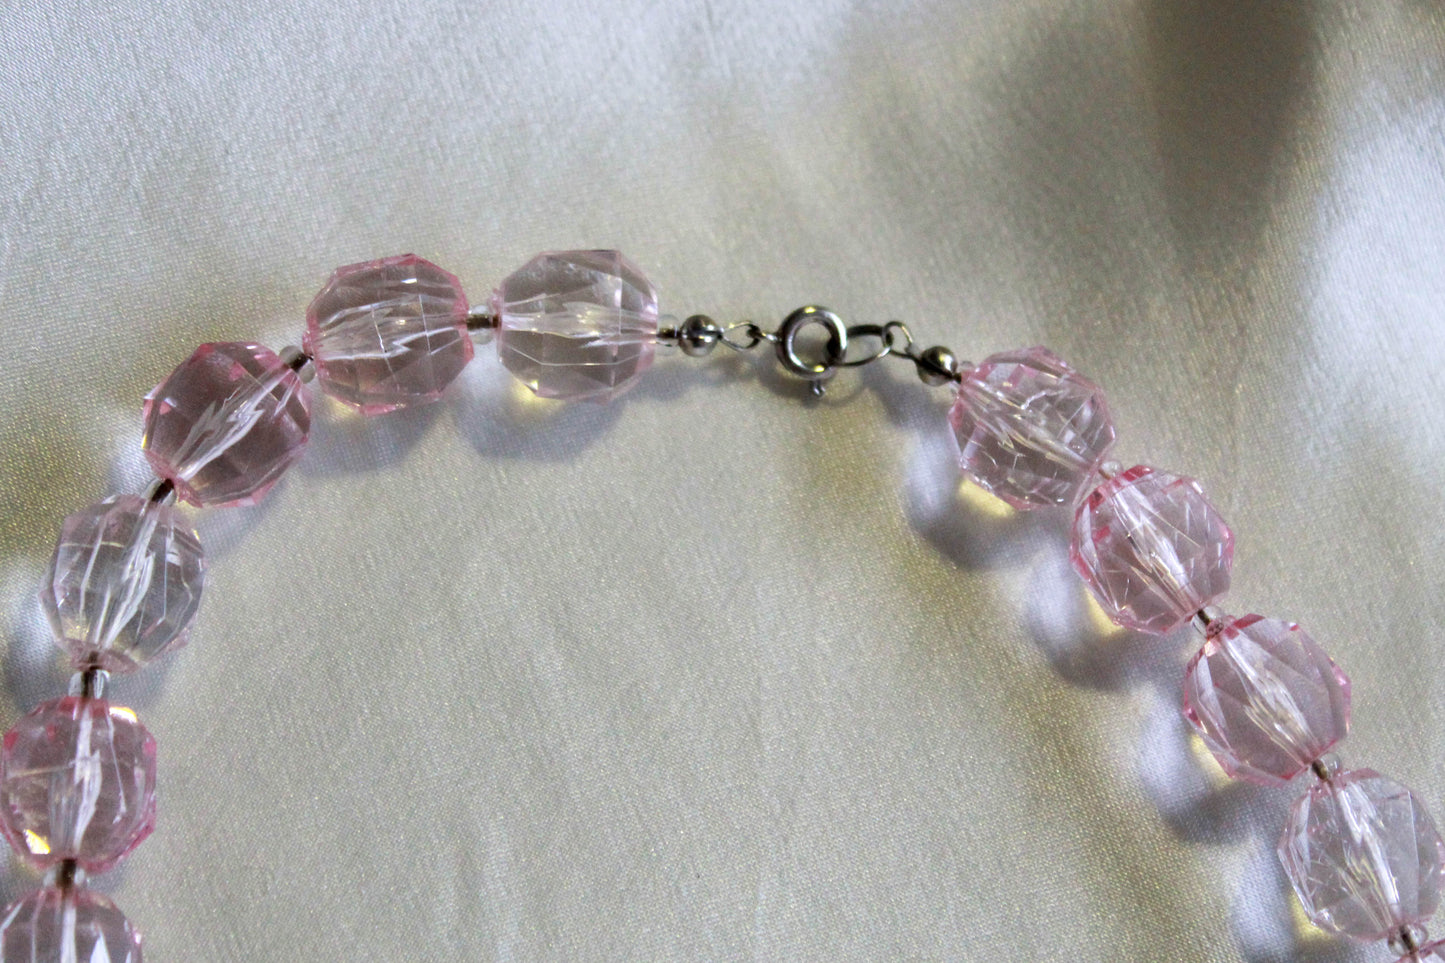 1960s Pale Pink Lucite Beaded Necklace